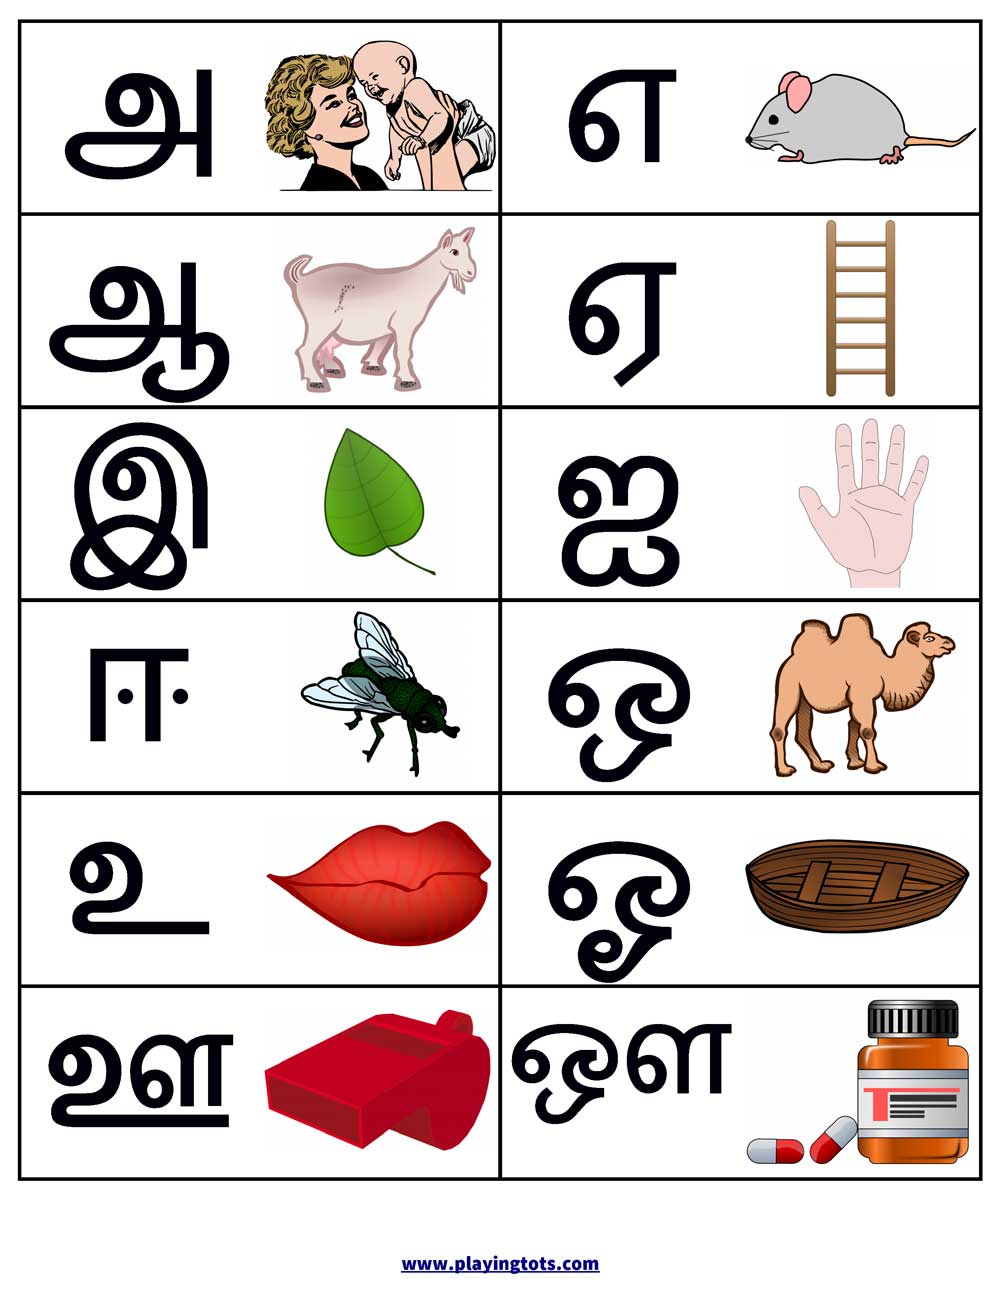 Alphabet Meaning In Tamil In Tamil Language There Heavenly Gilissen